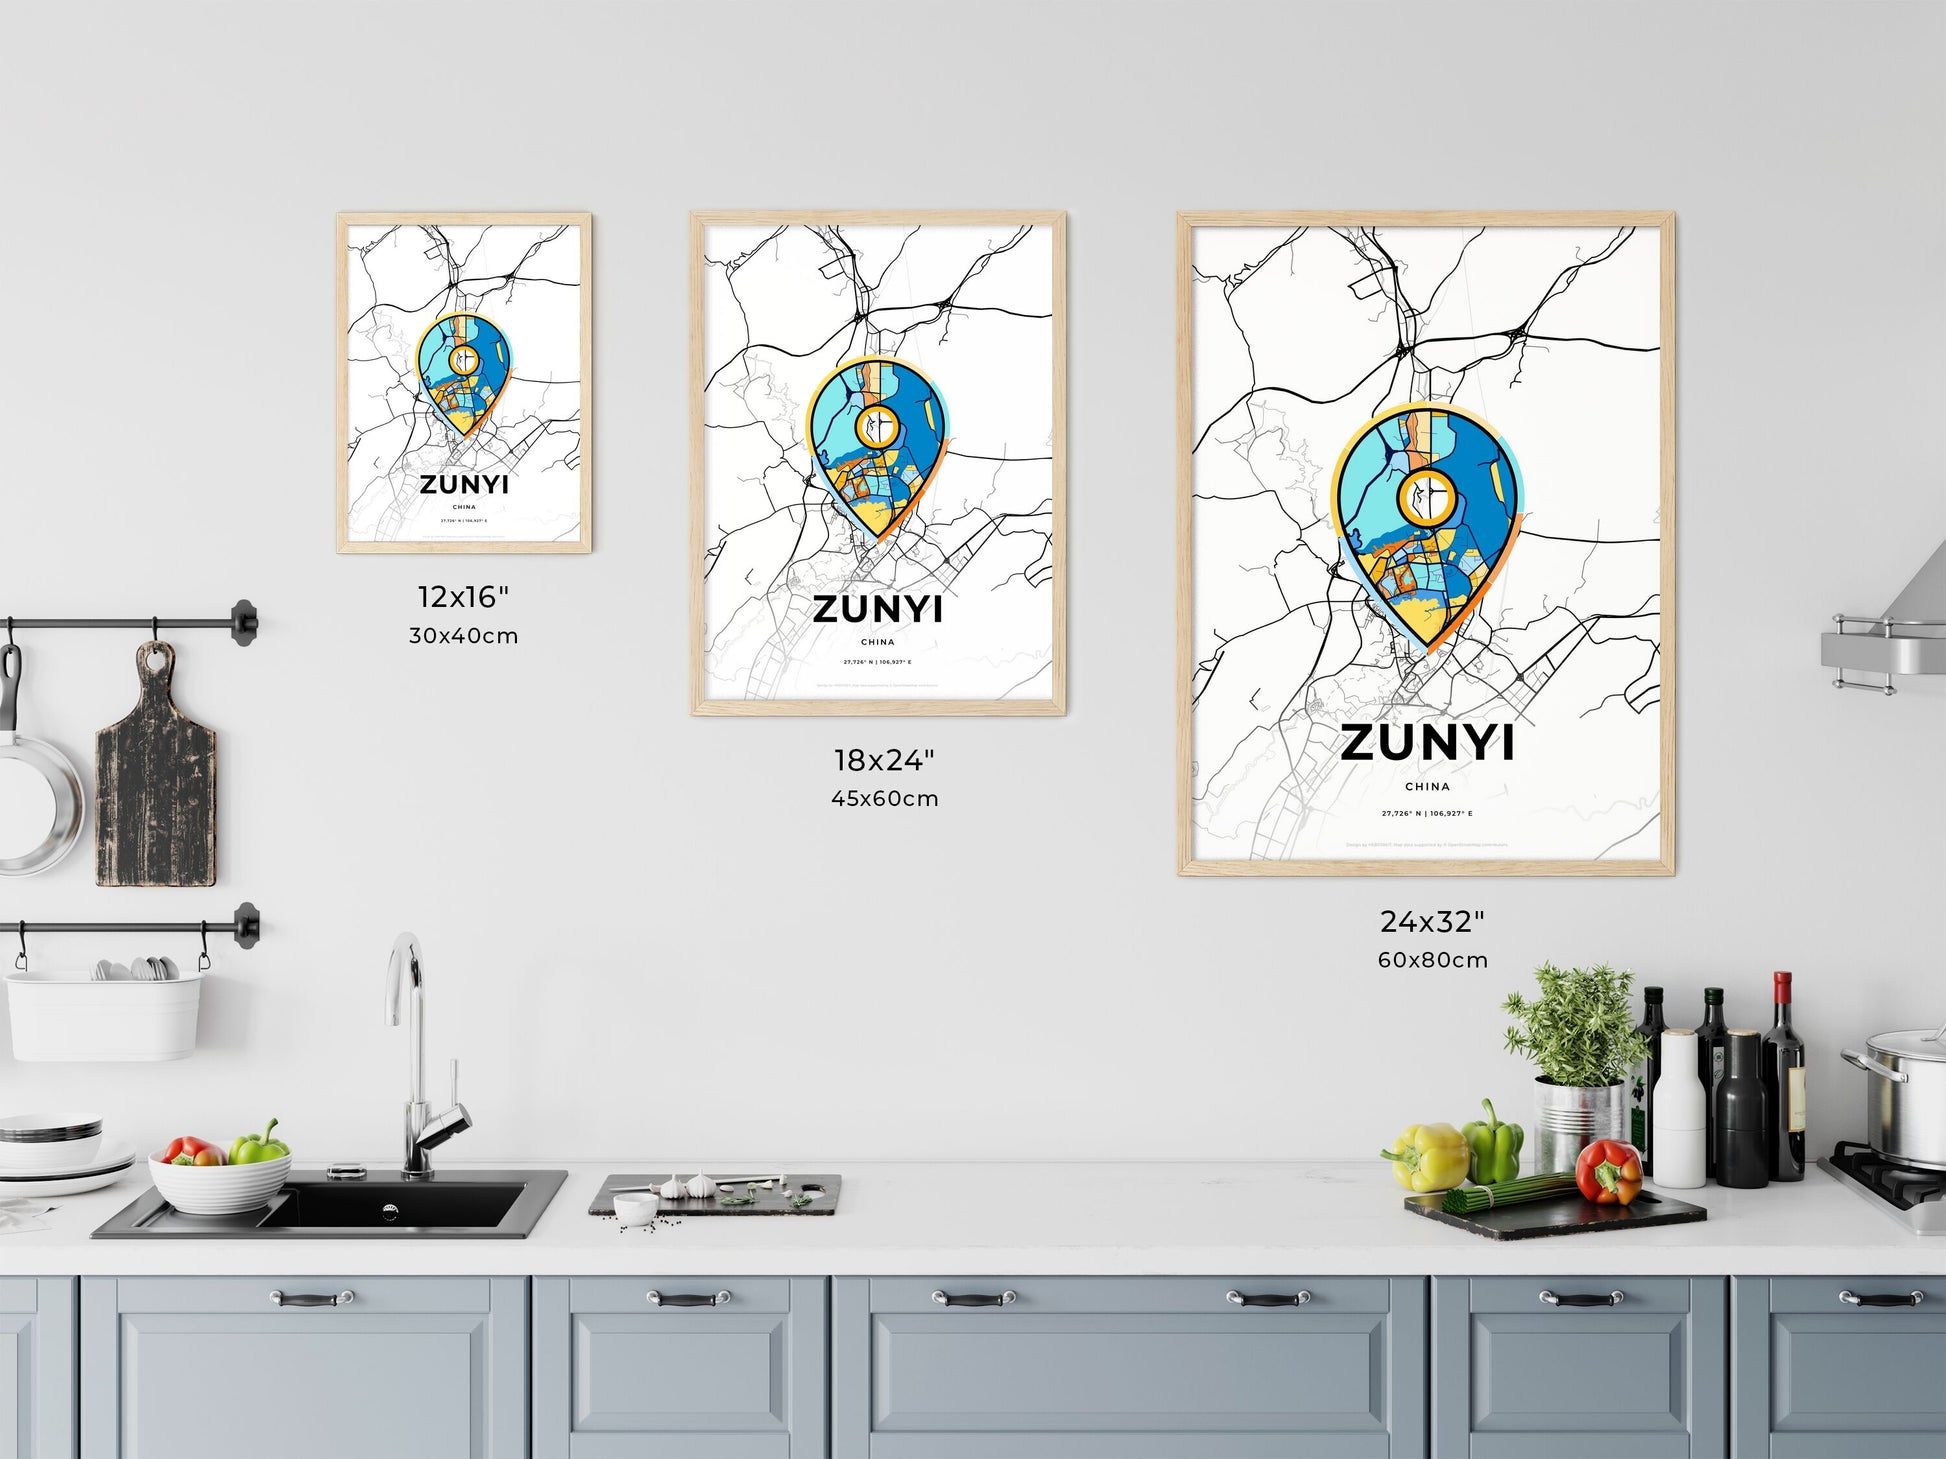 ZUNYI CHINA minimal art map with a colorful icon. Where it all began, Couple map gift.